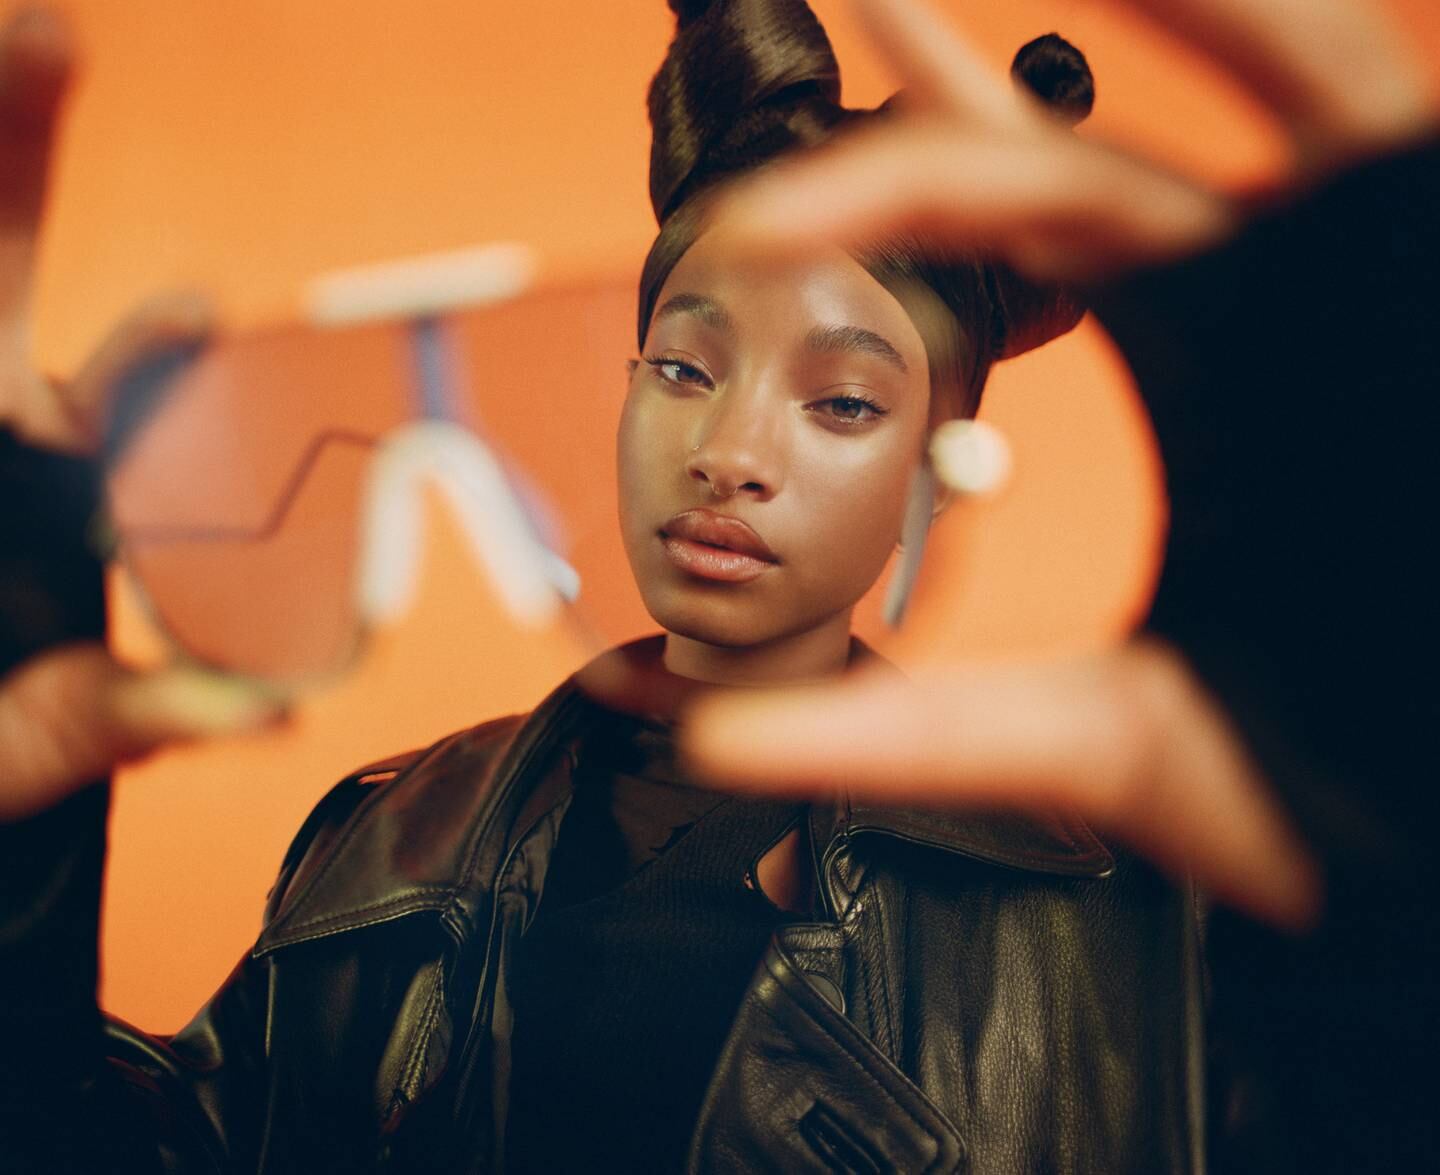 Willow Smith is both a muse and artistic collaborator for Won Lee's newest venture, an eyewear line. Courtesy.